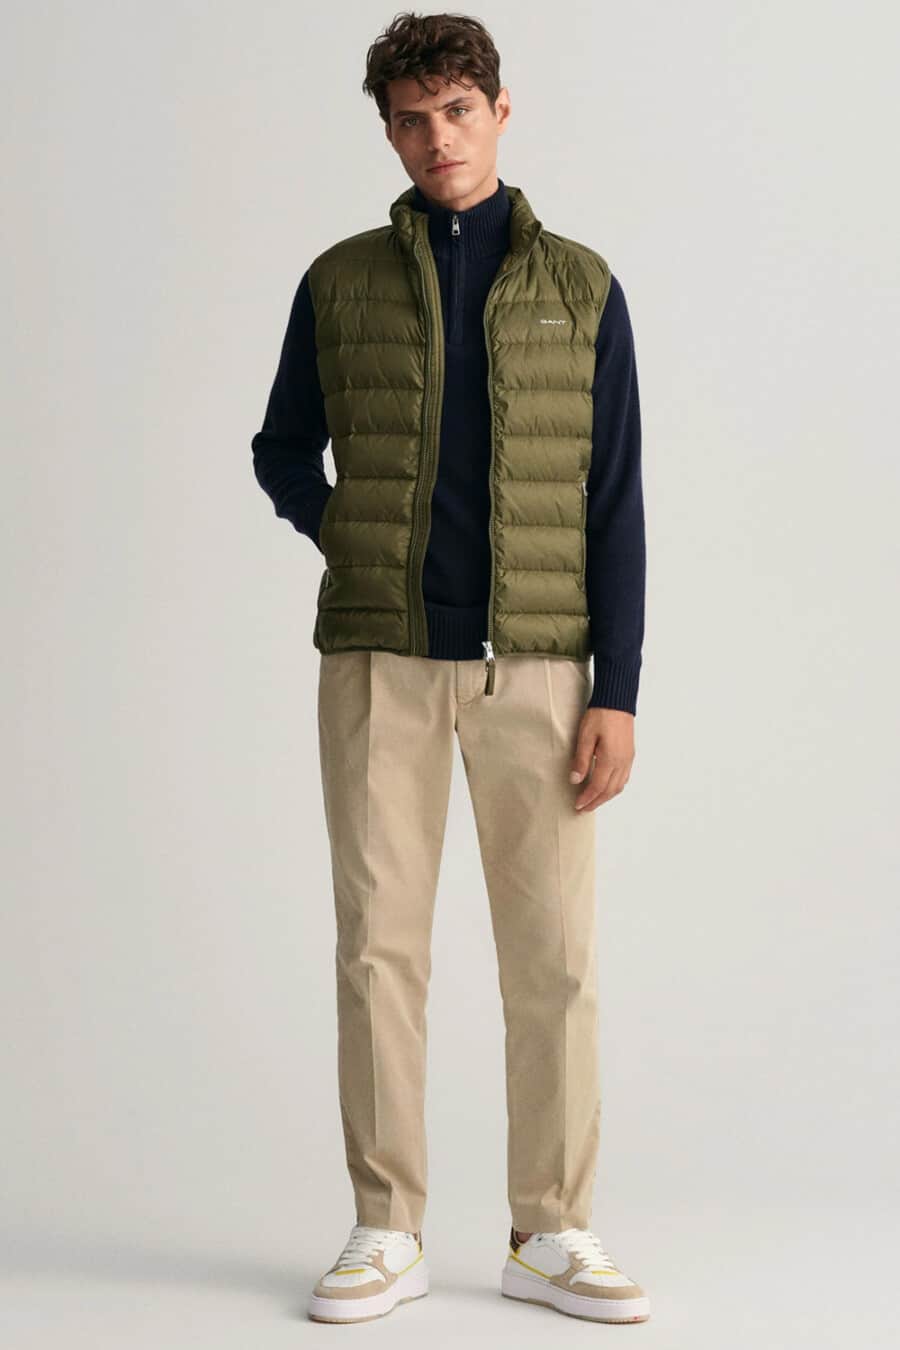 Men's khaki pants, navy quarter zip-neck top, green puffer vest and chunk white/brown sneakers outfit